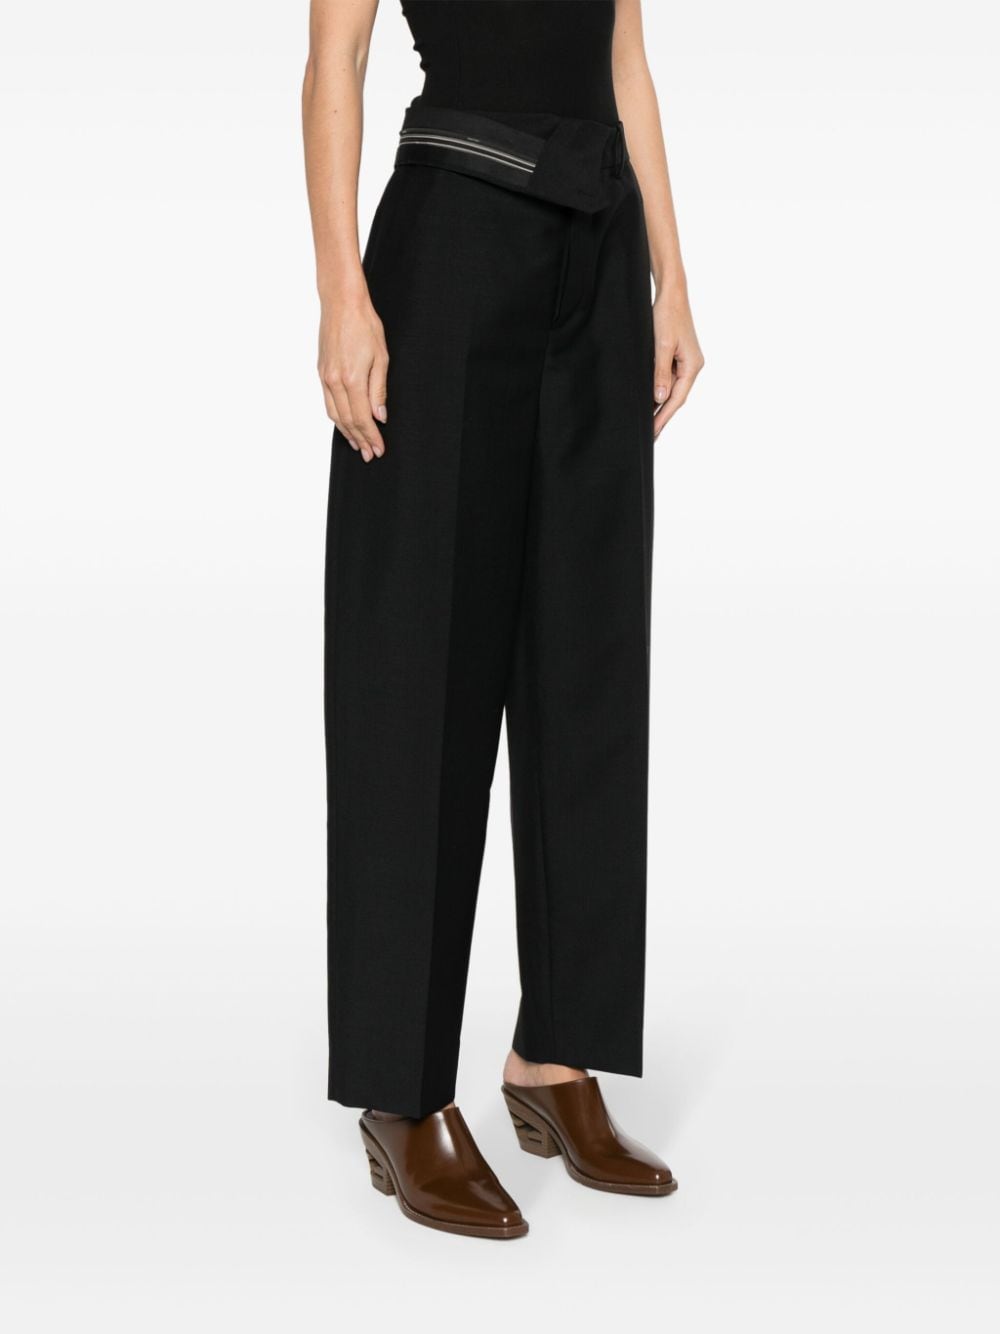 FENDI Black Wool Trousers with Asymmetric Waist and Overlapping Panel for Women